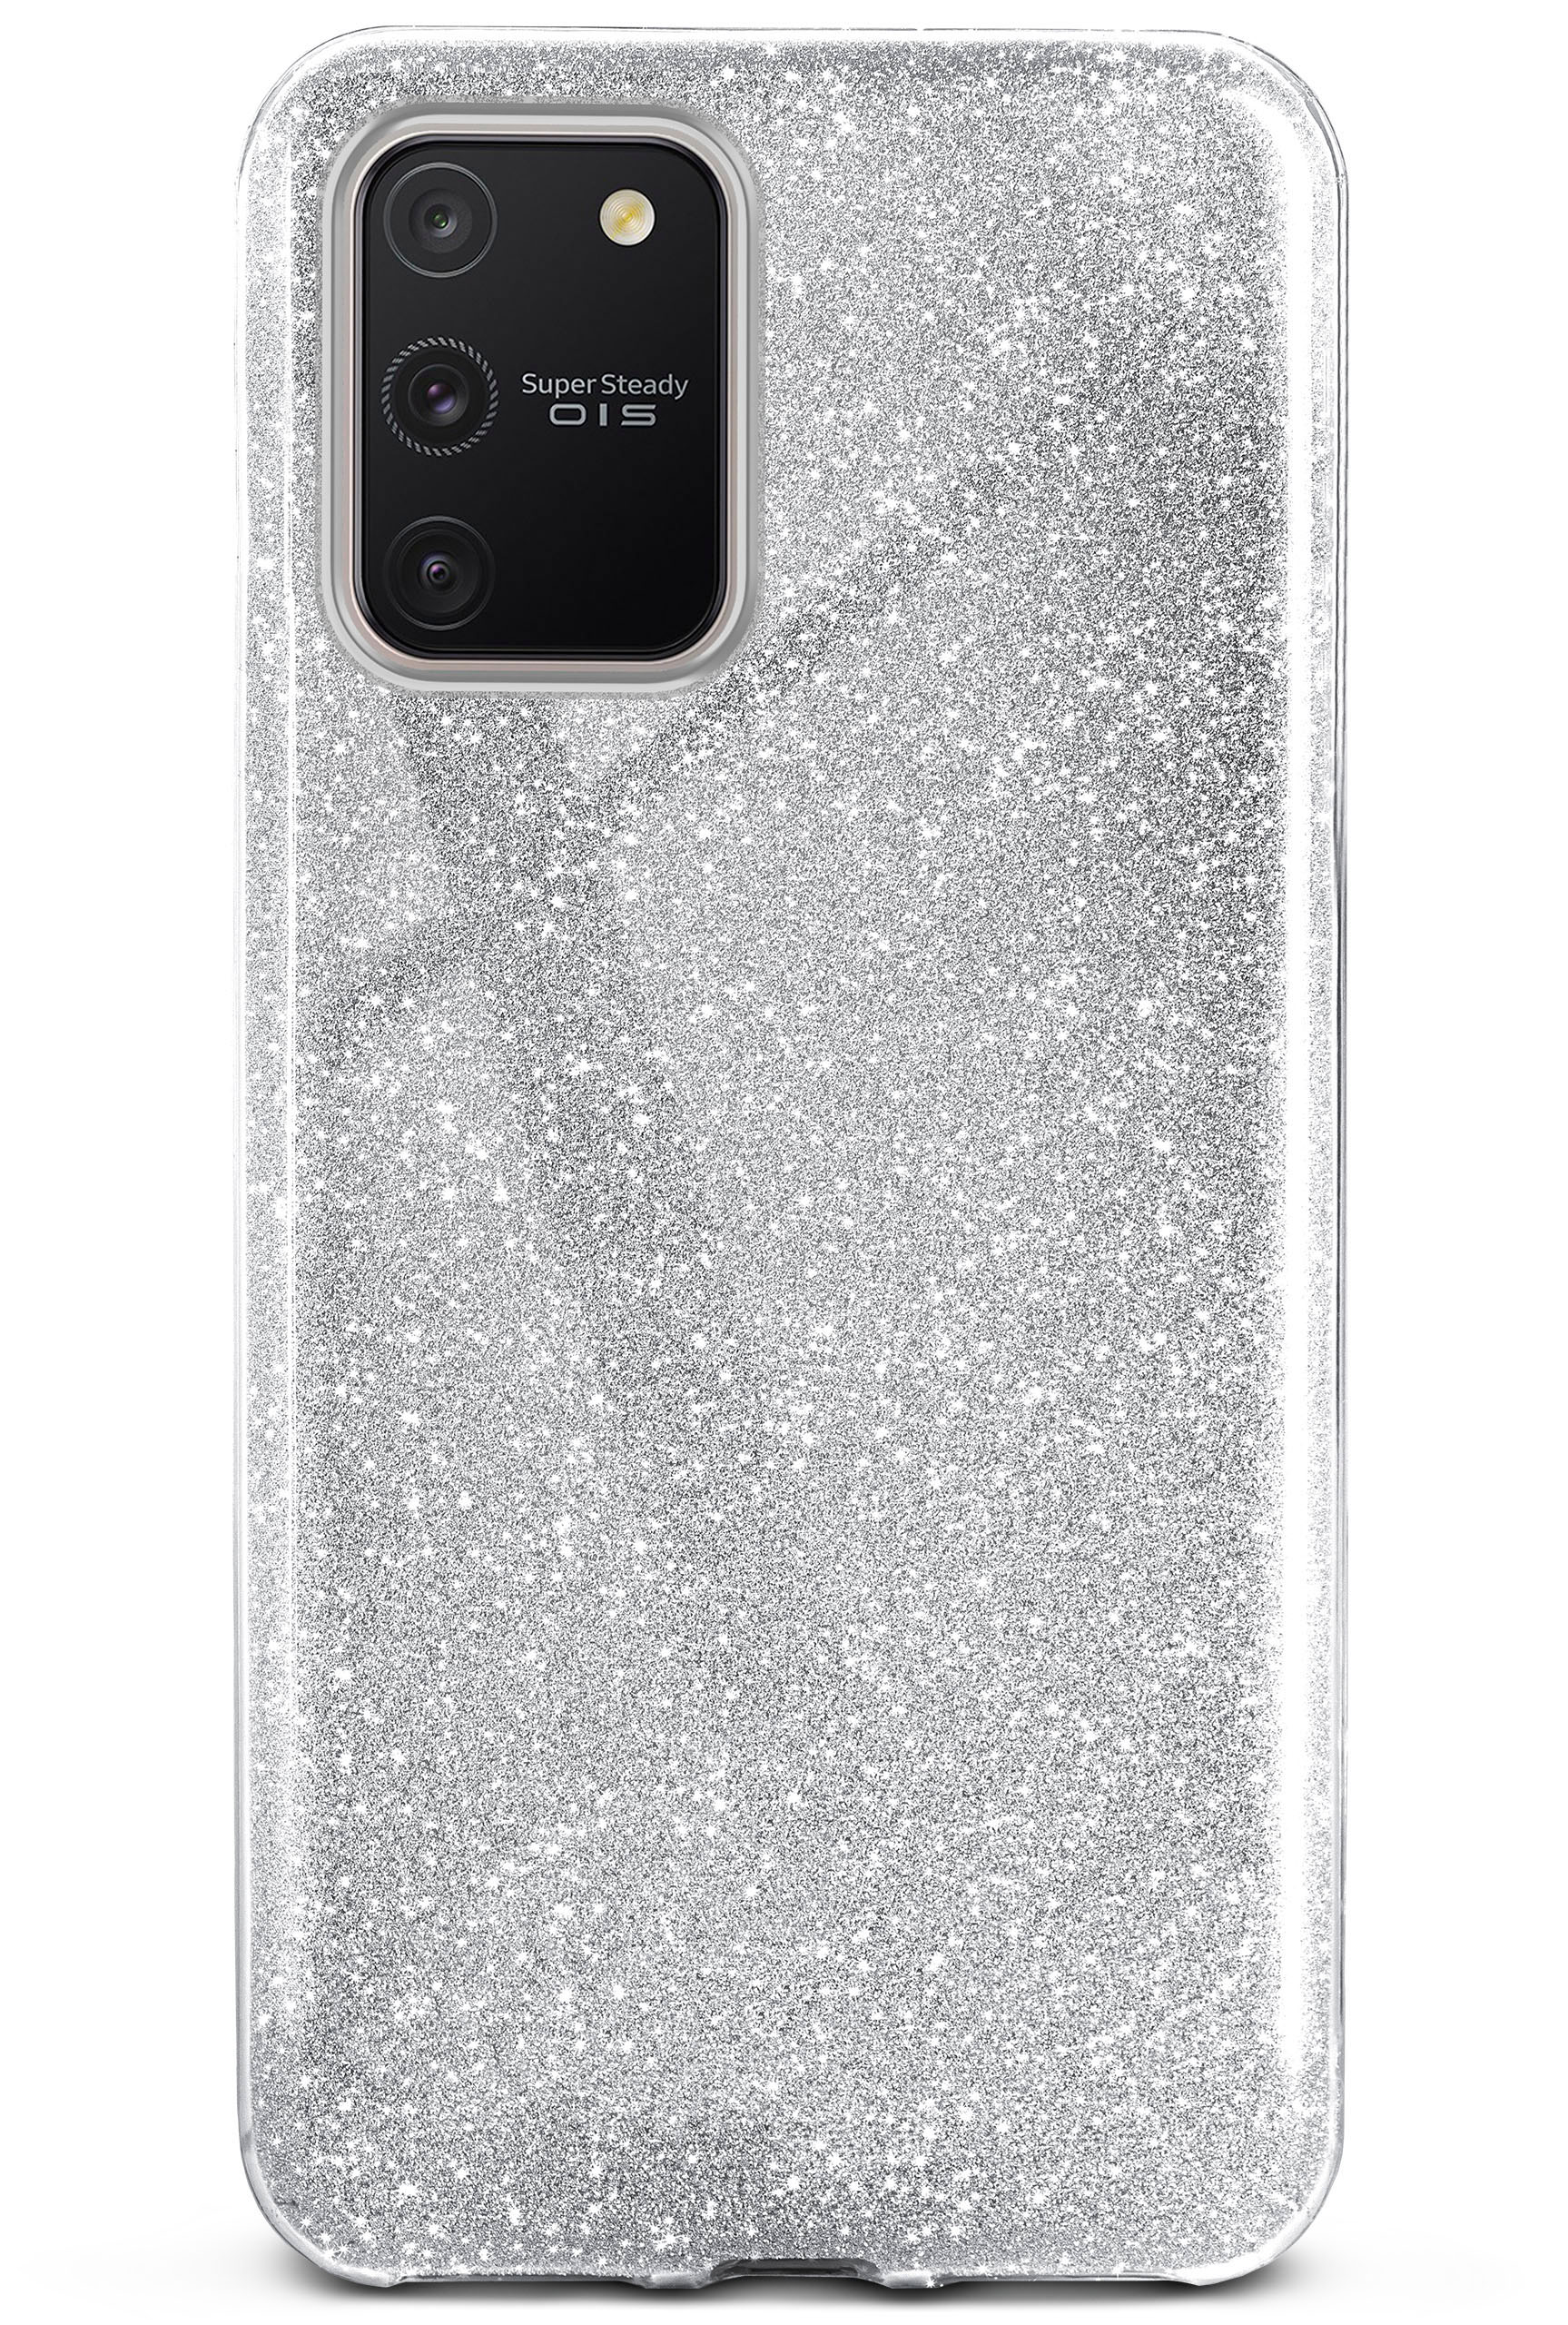 ONEFLOW Glitter Case, Backcover, Lite, Sparkle Samsung, S10 - Silver Galaxy